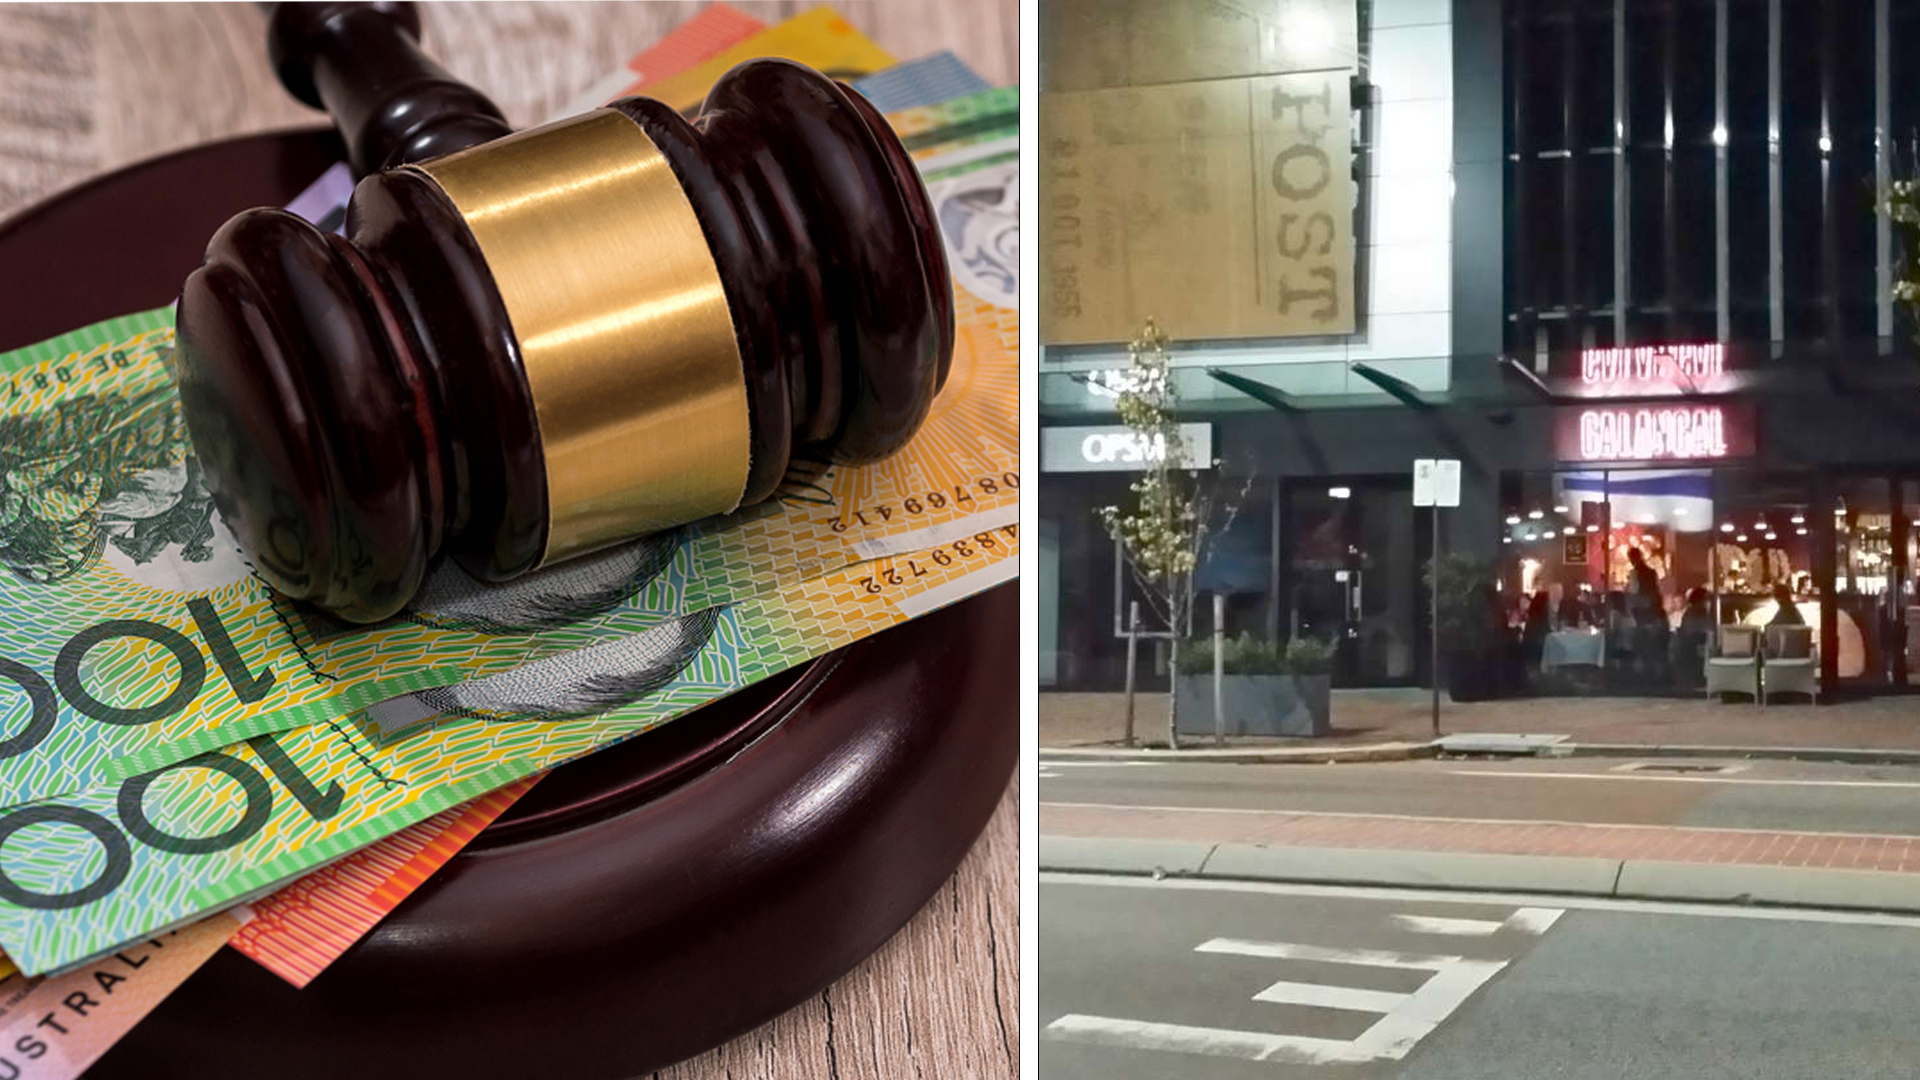 Restaurant Penalised $78,000 For Refusing To Back-pay Workers